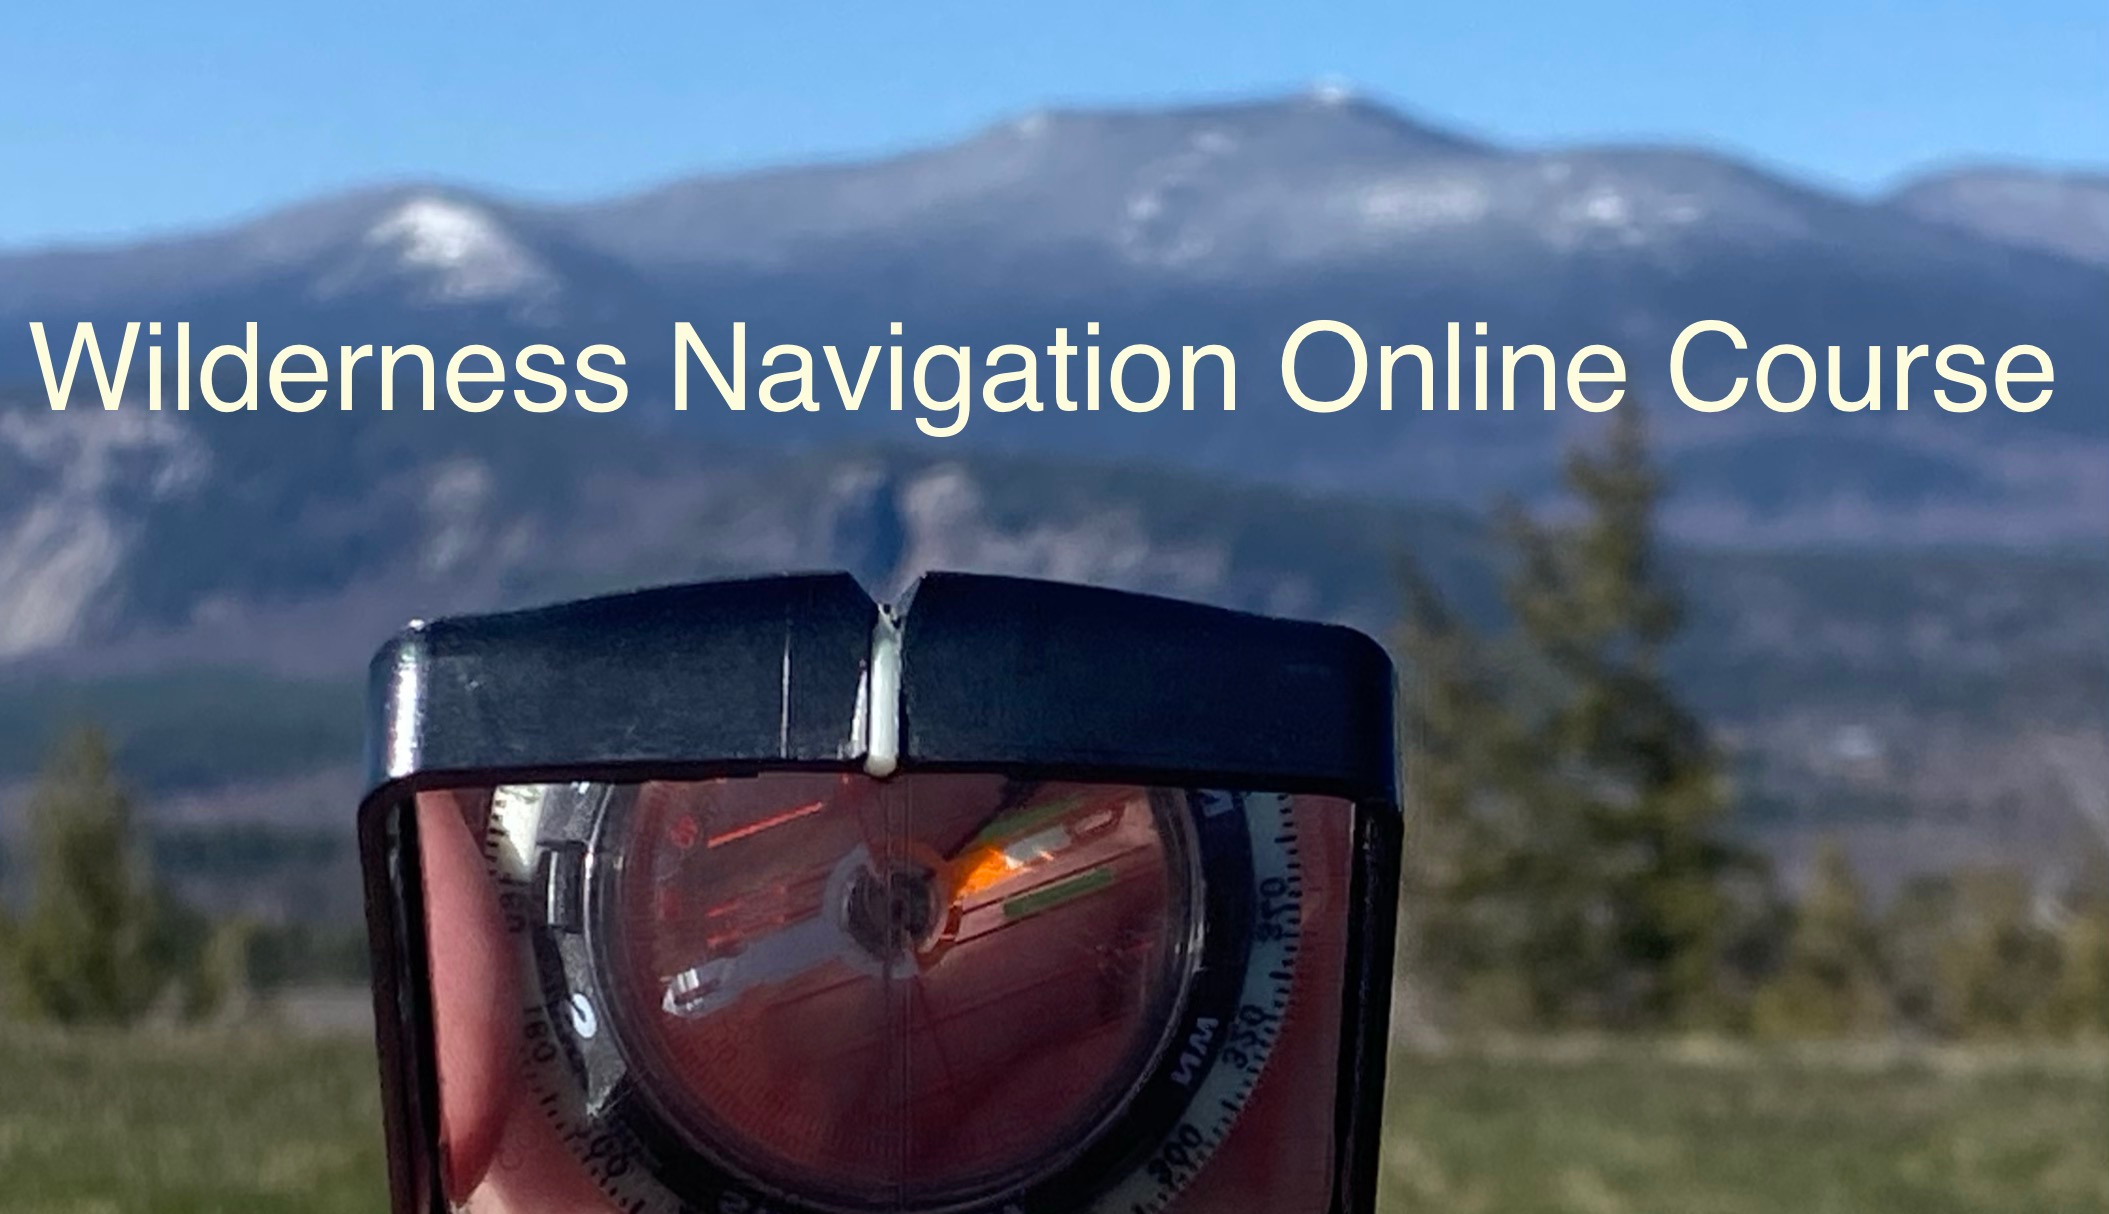 Wilderness Navigation Online Course Map and Compass